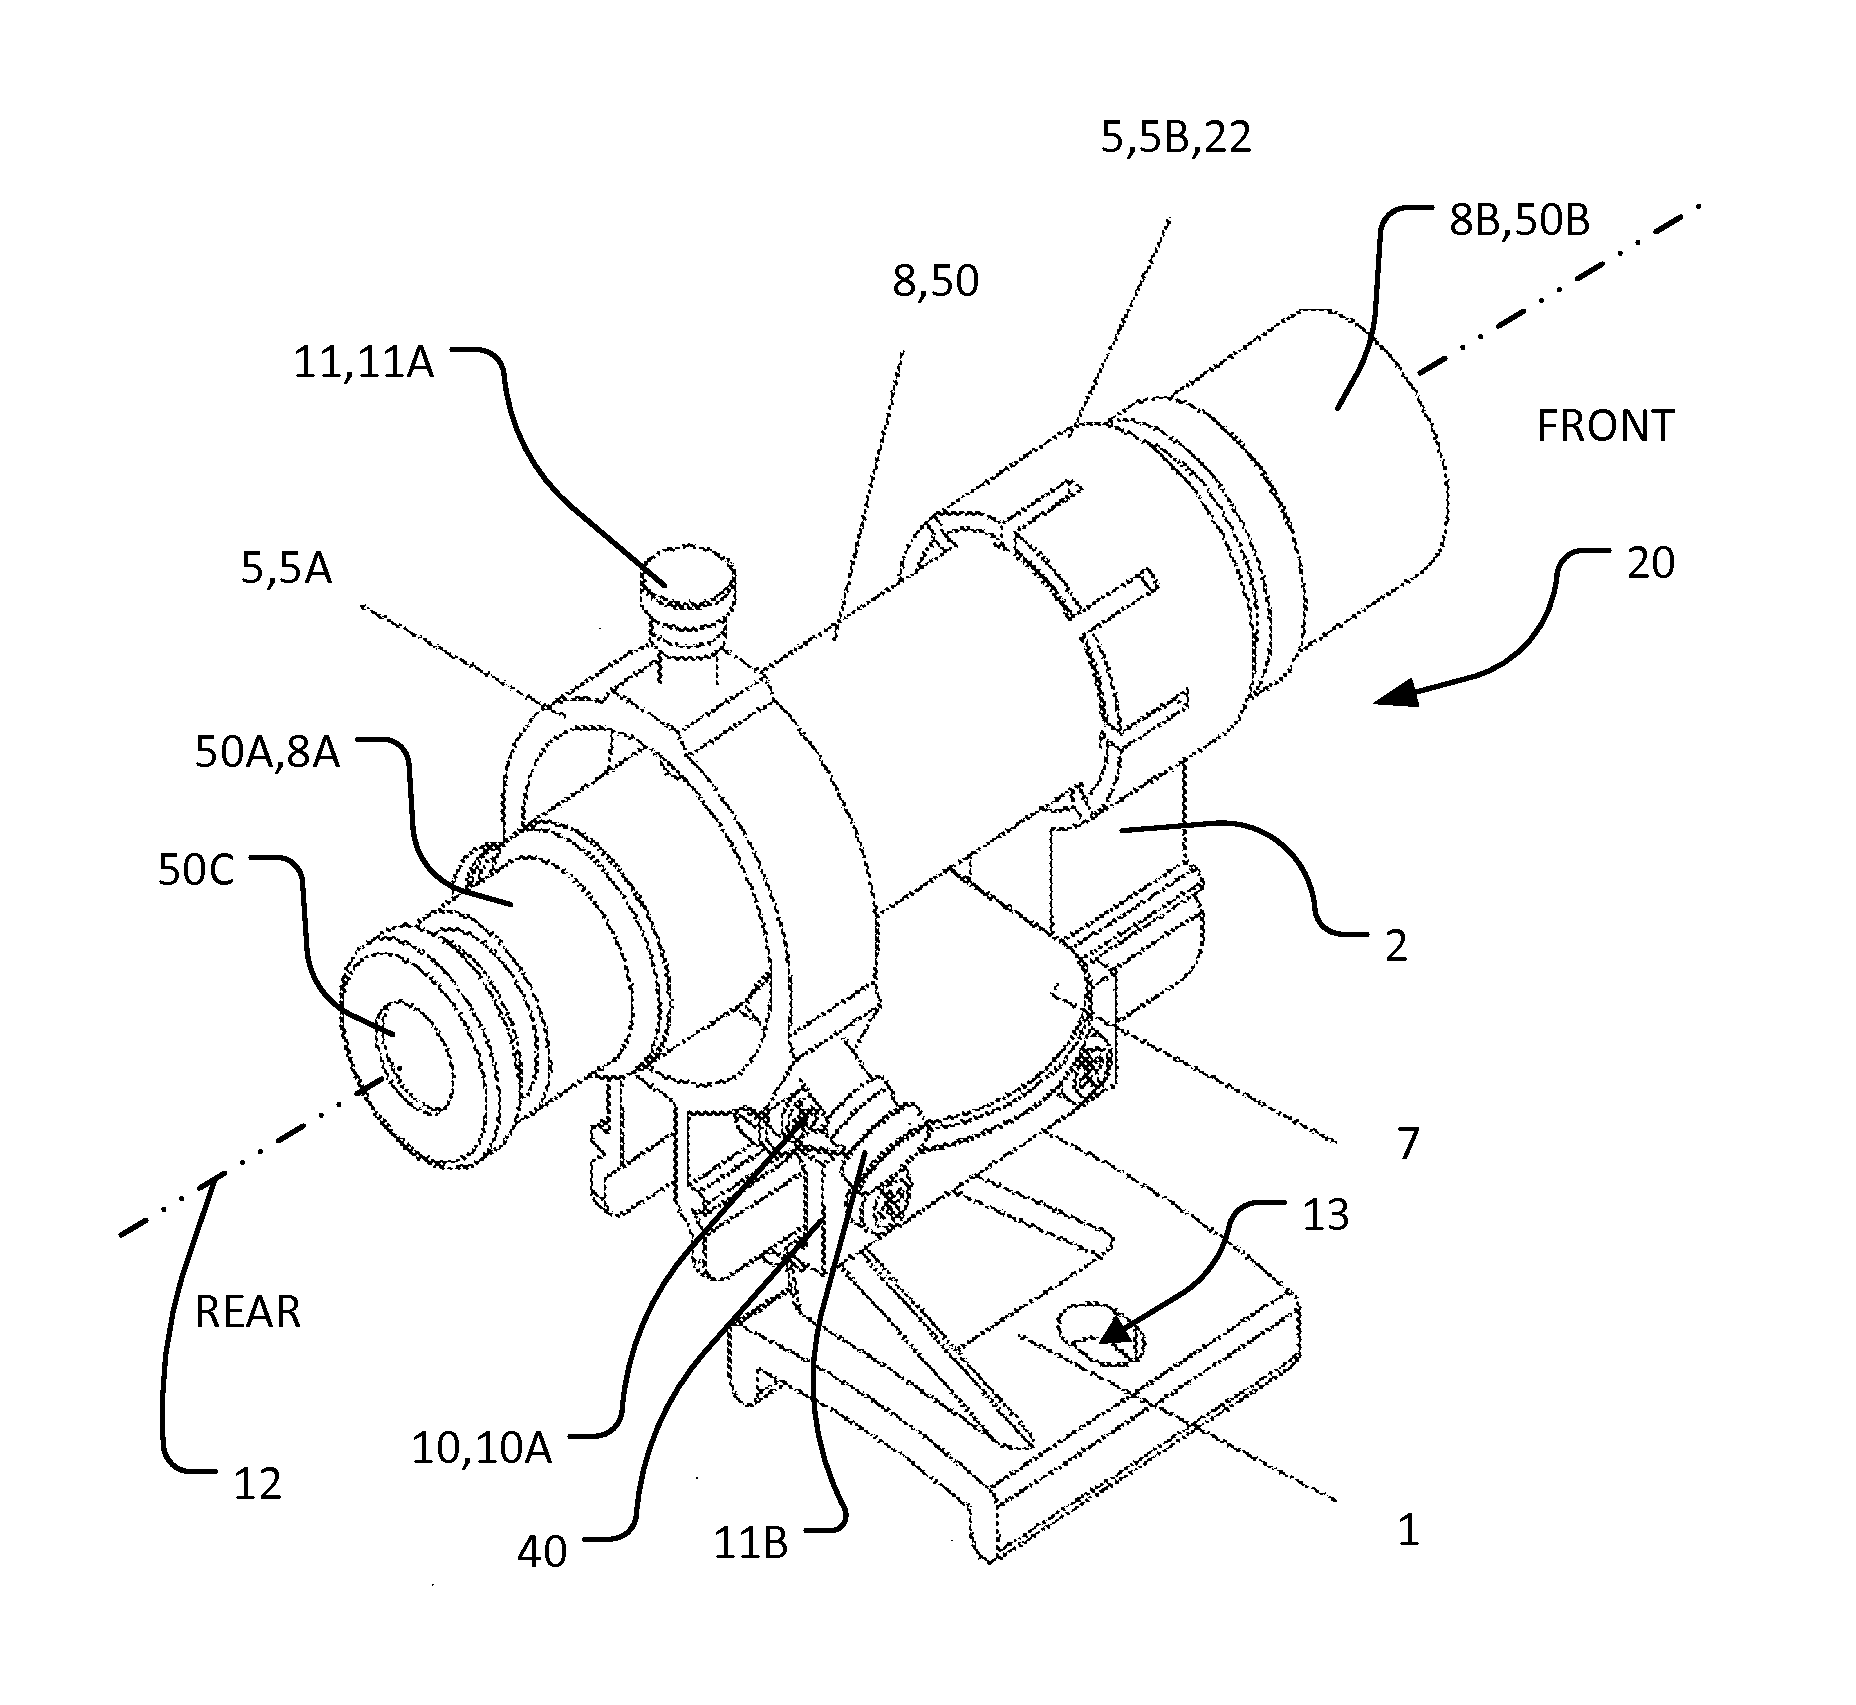 Object finder mounting apparatus, systems for viewing objects and methods for using same